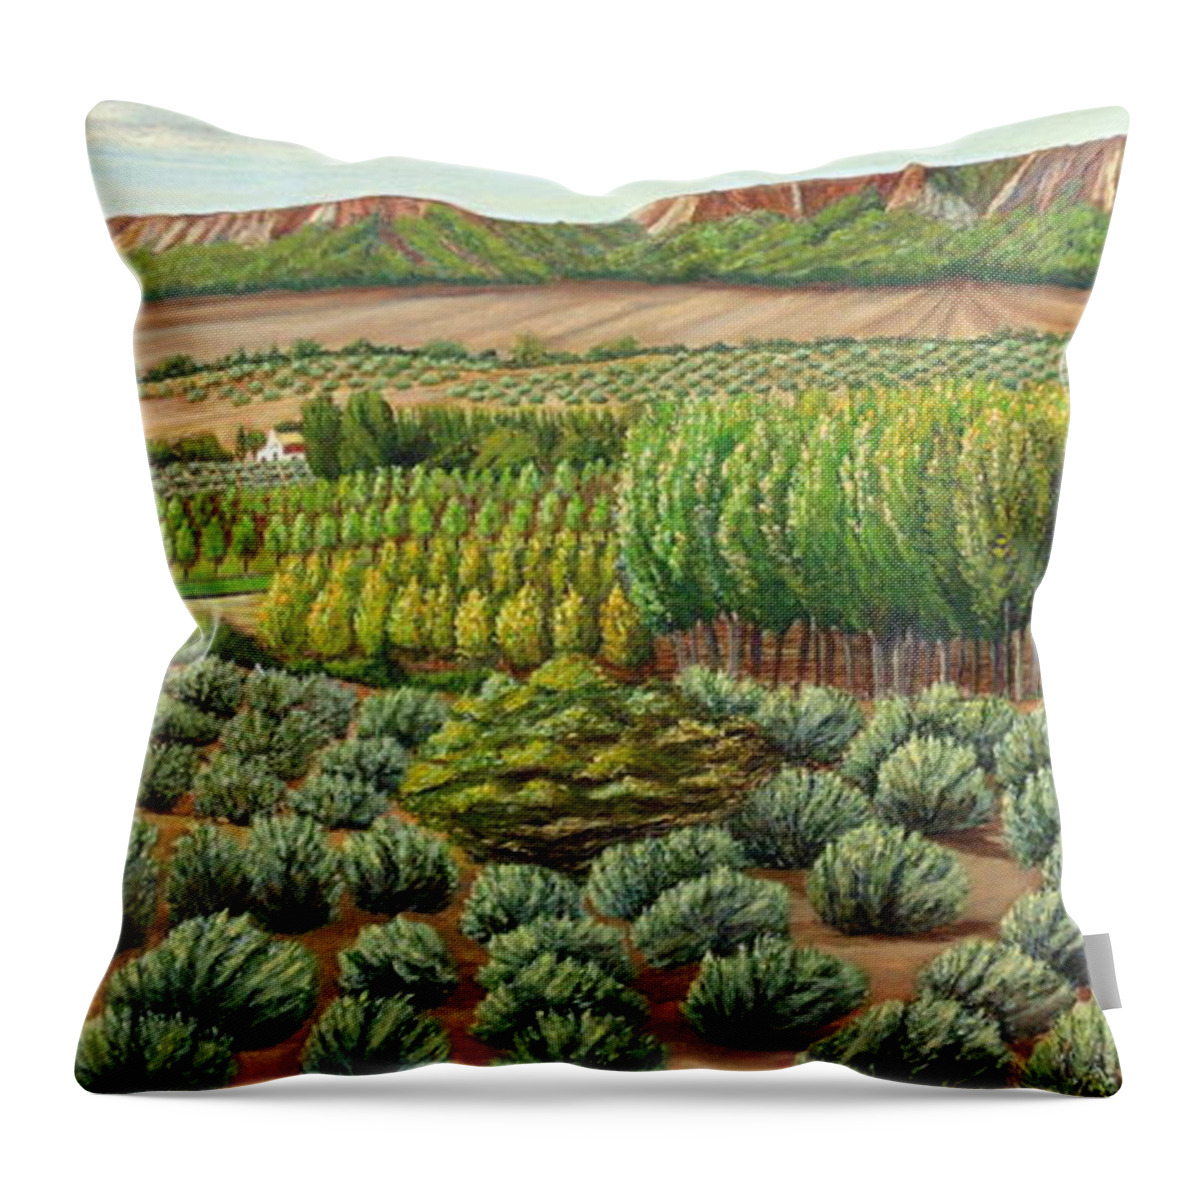 Pines Throw Pillow featuring the painting Bright Morning In Alcudia by Angeles M Pomata